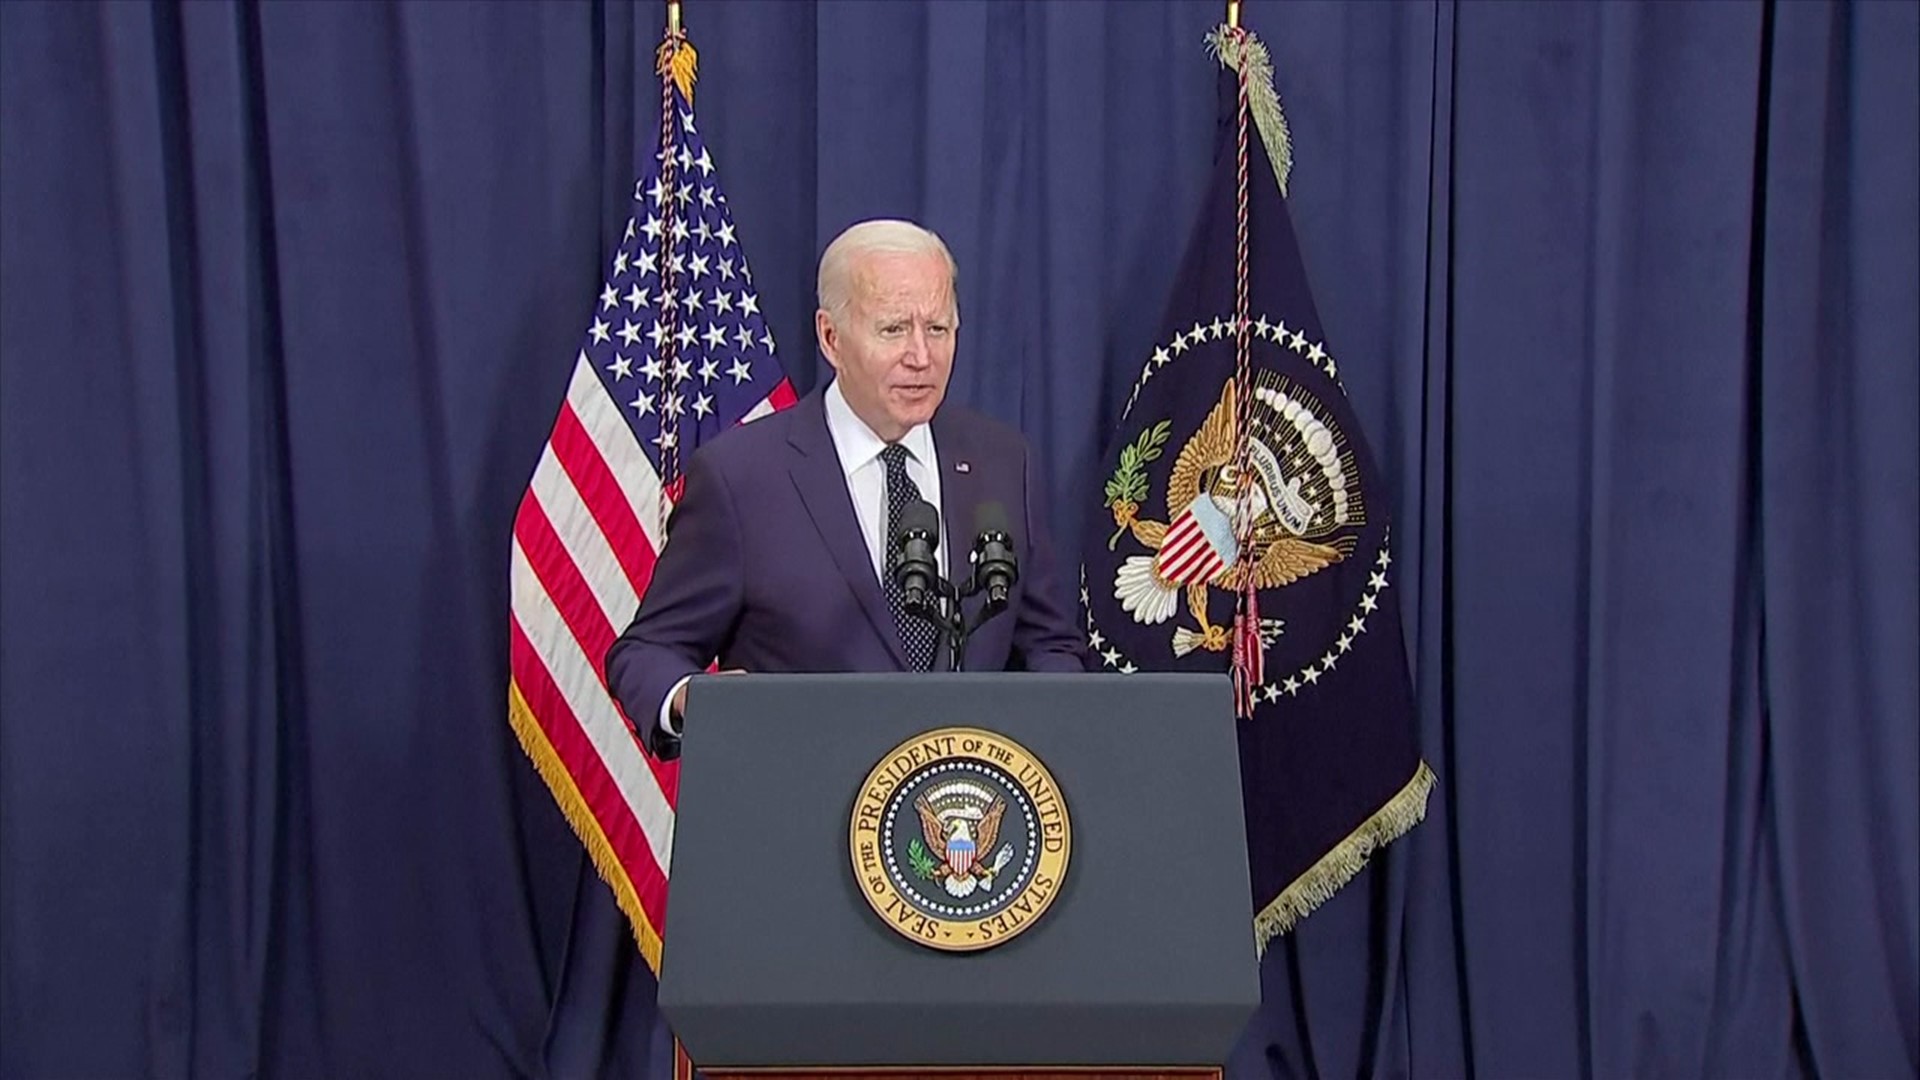 Here's a look at President Biden's visit to Wilkes University Tuesday.